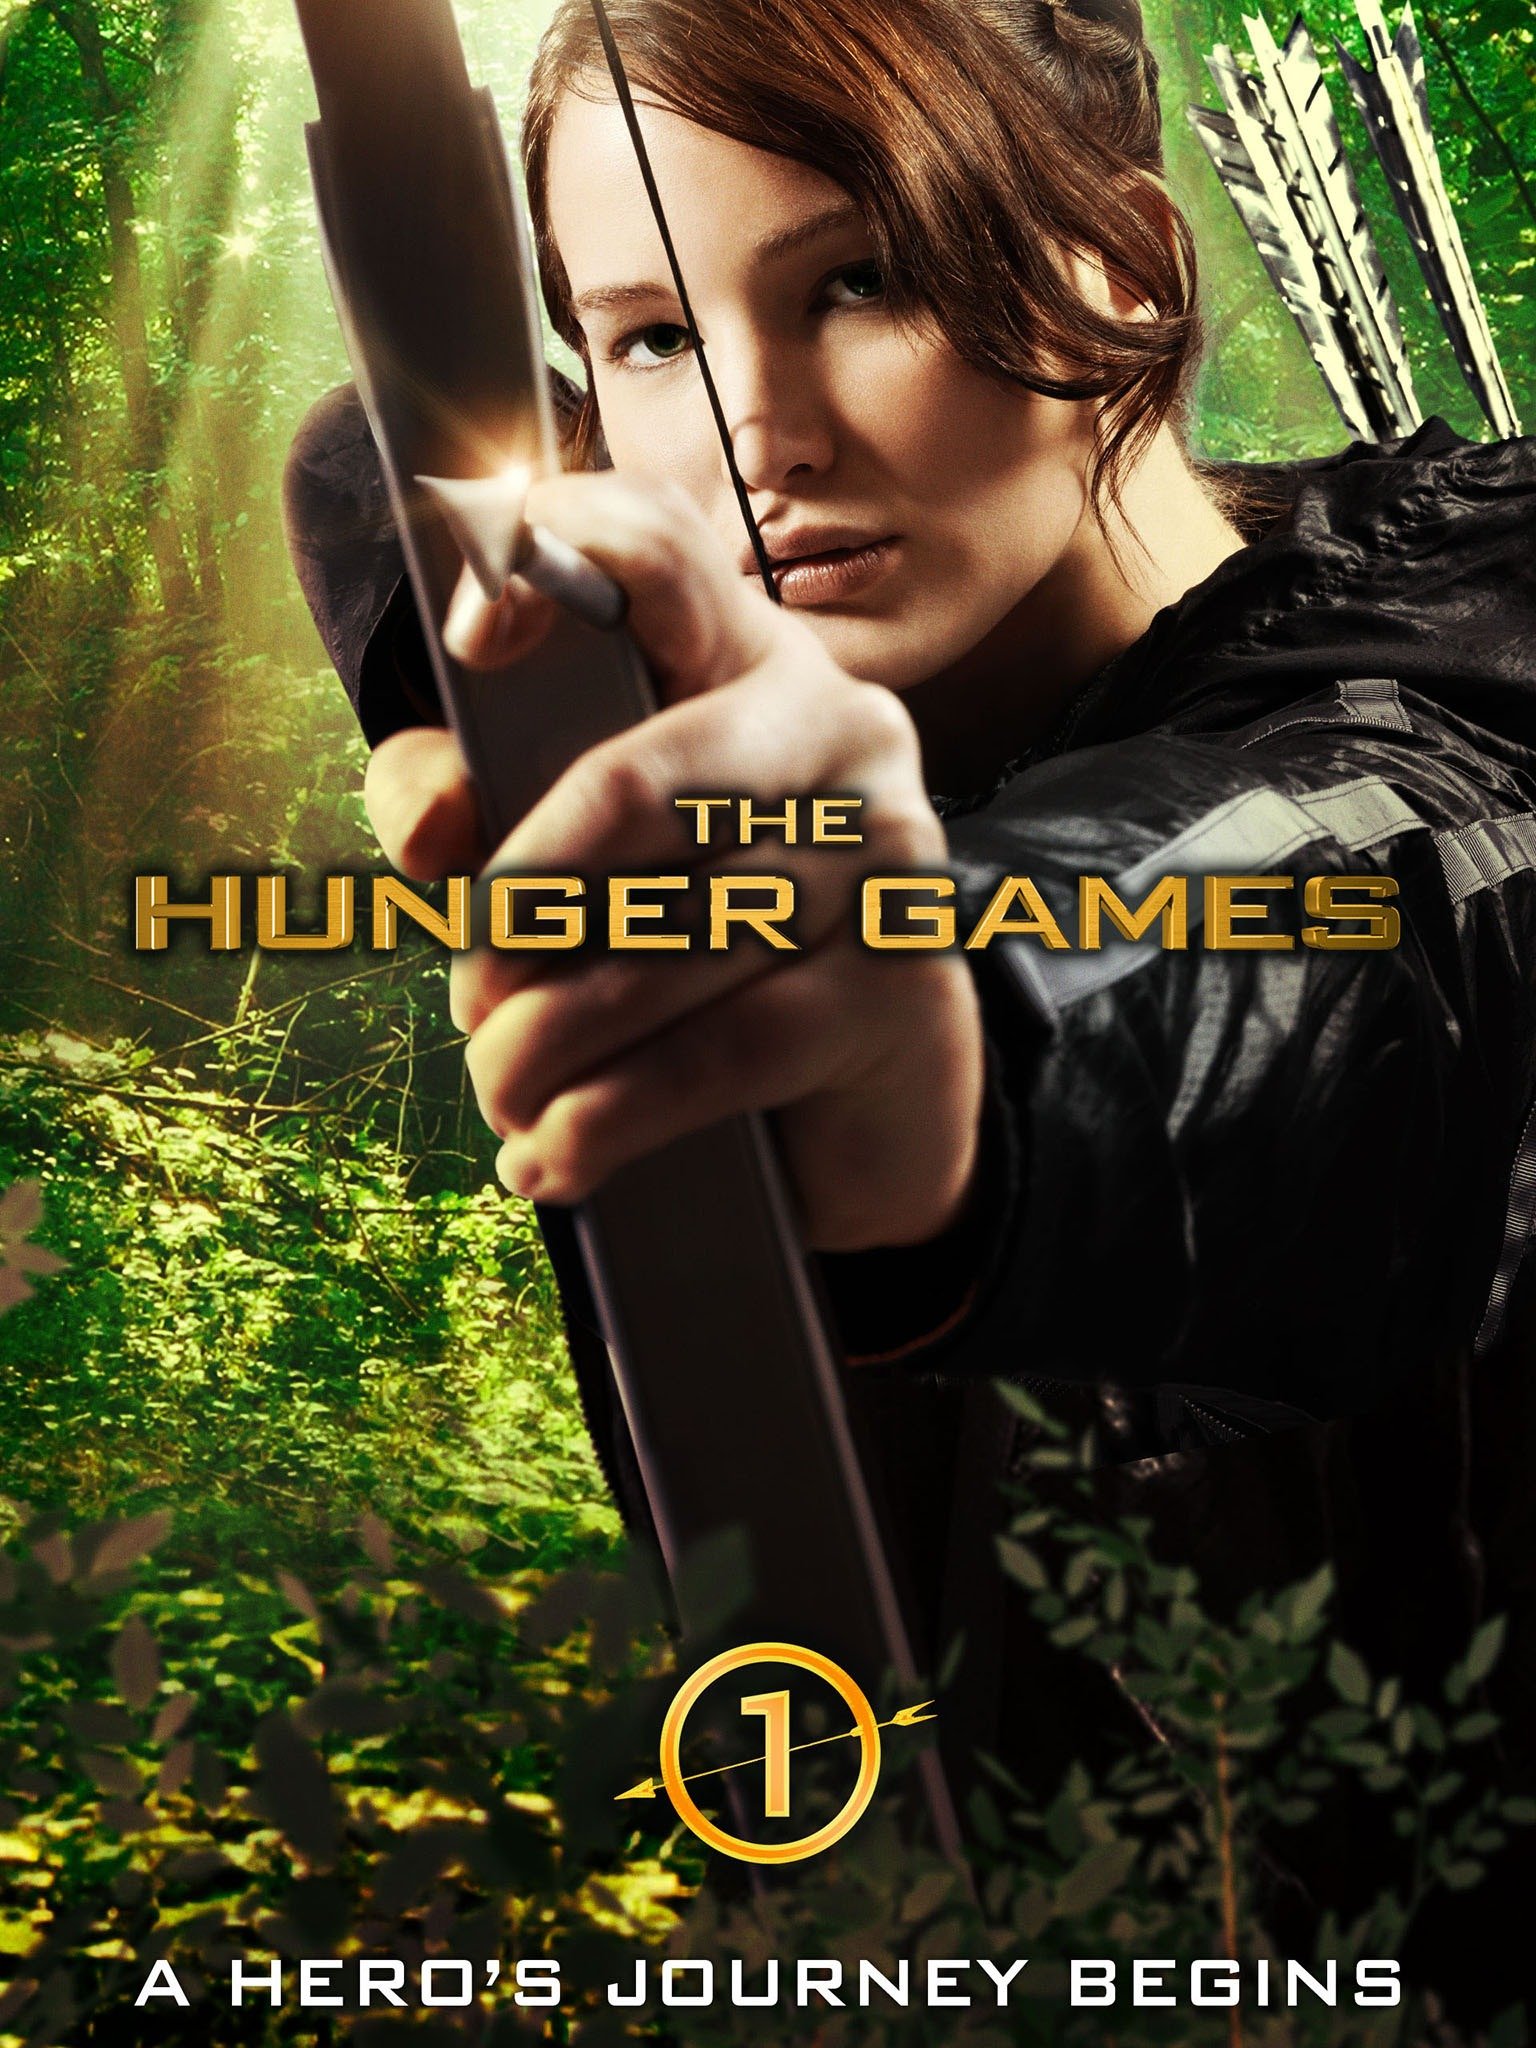 the hunger games film review essay